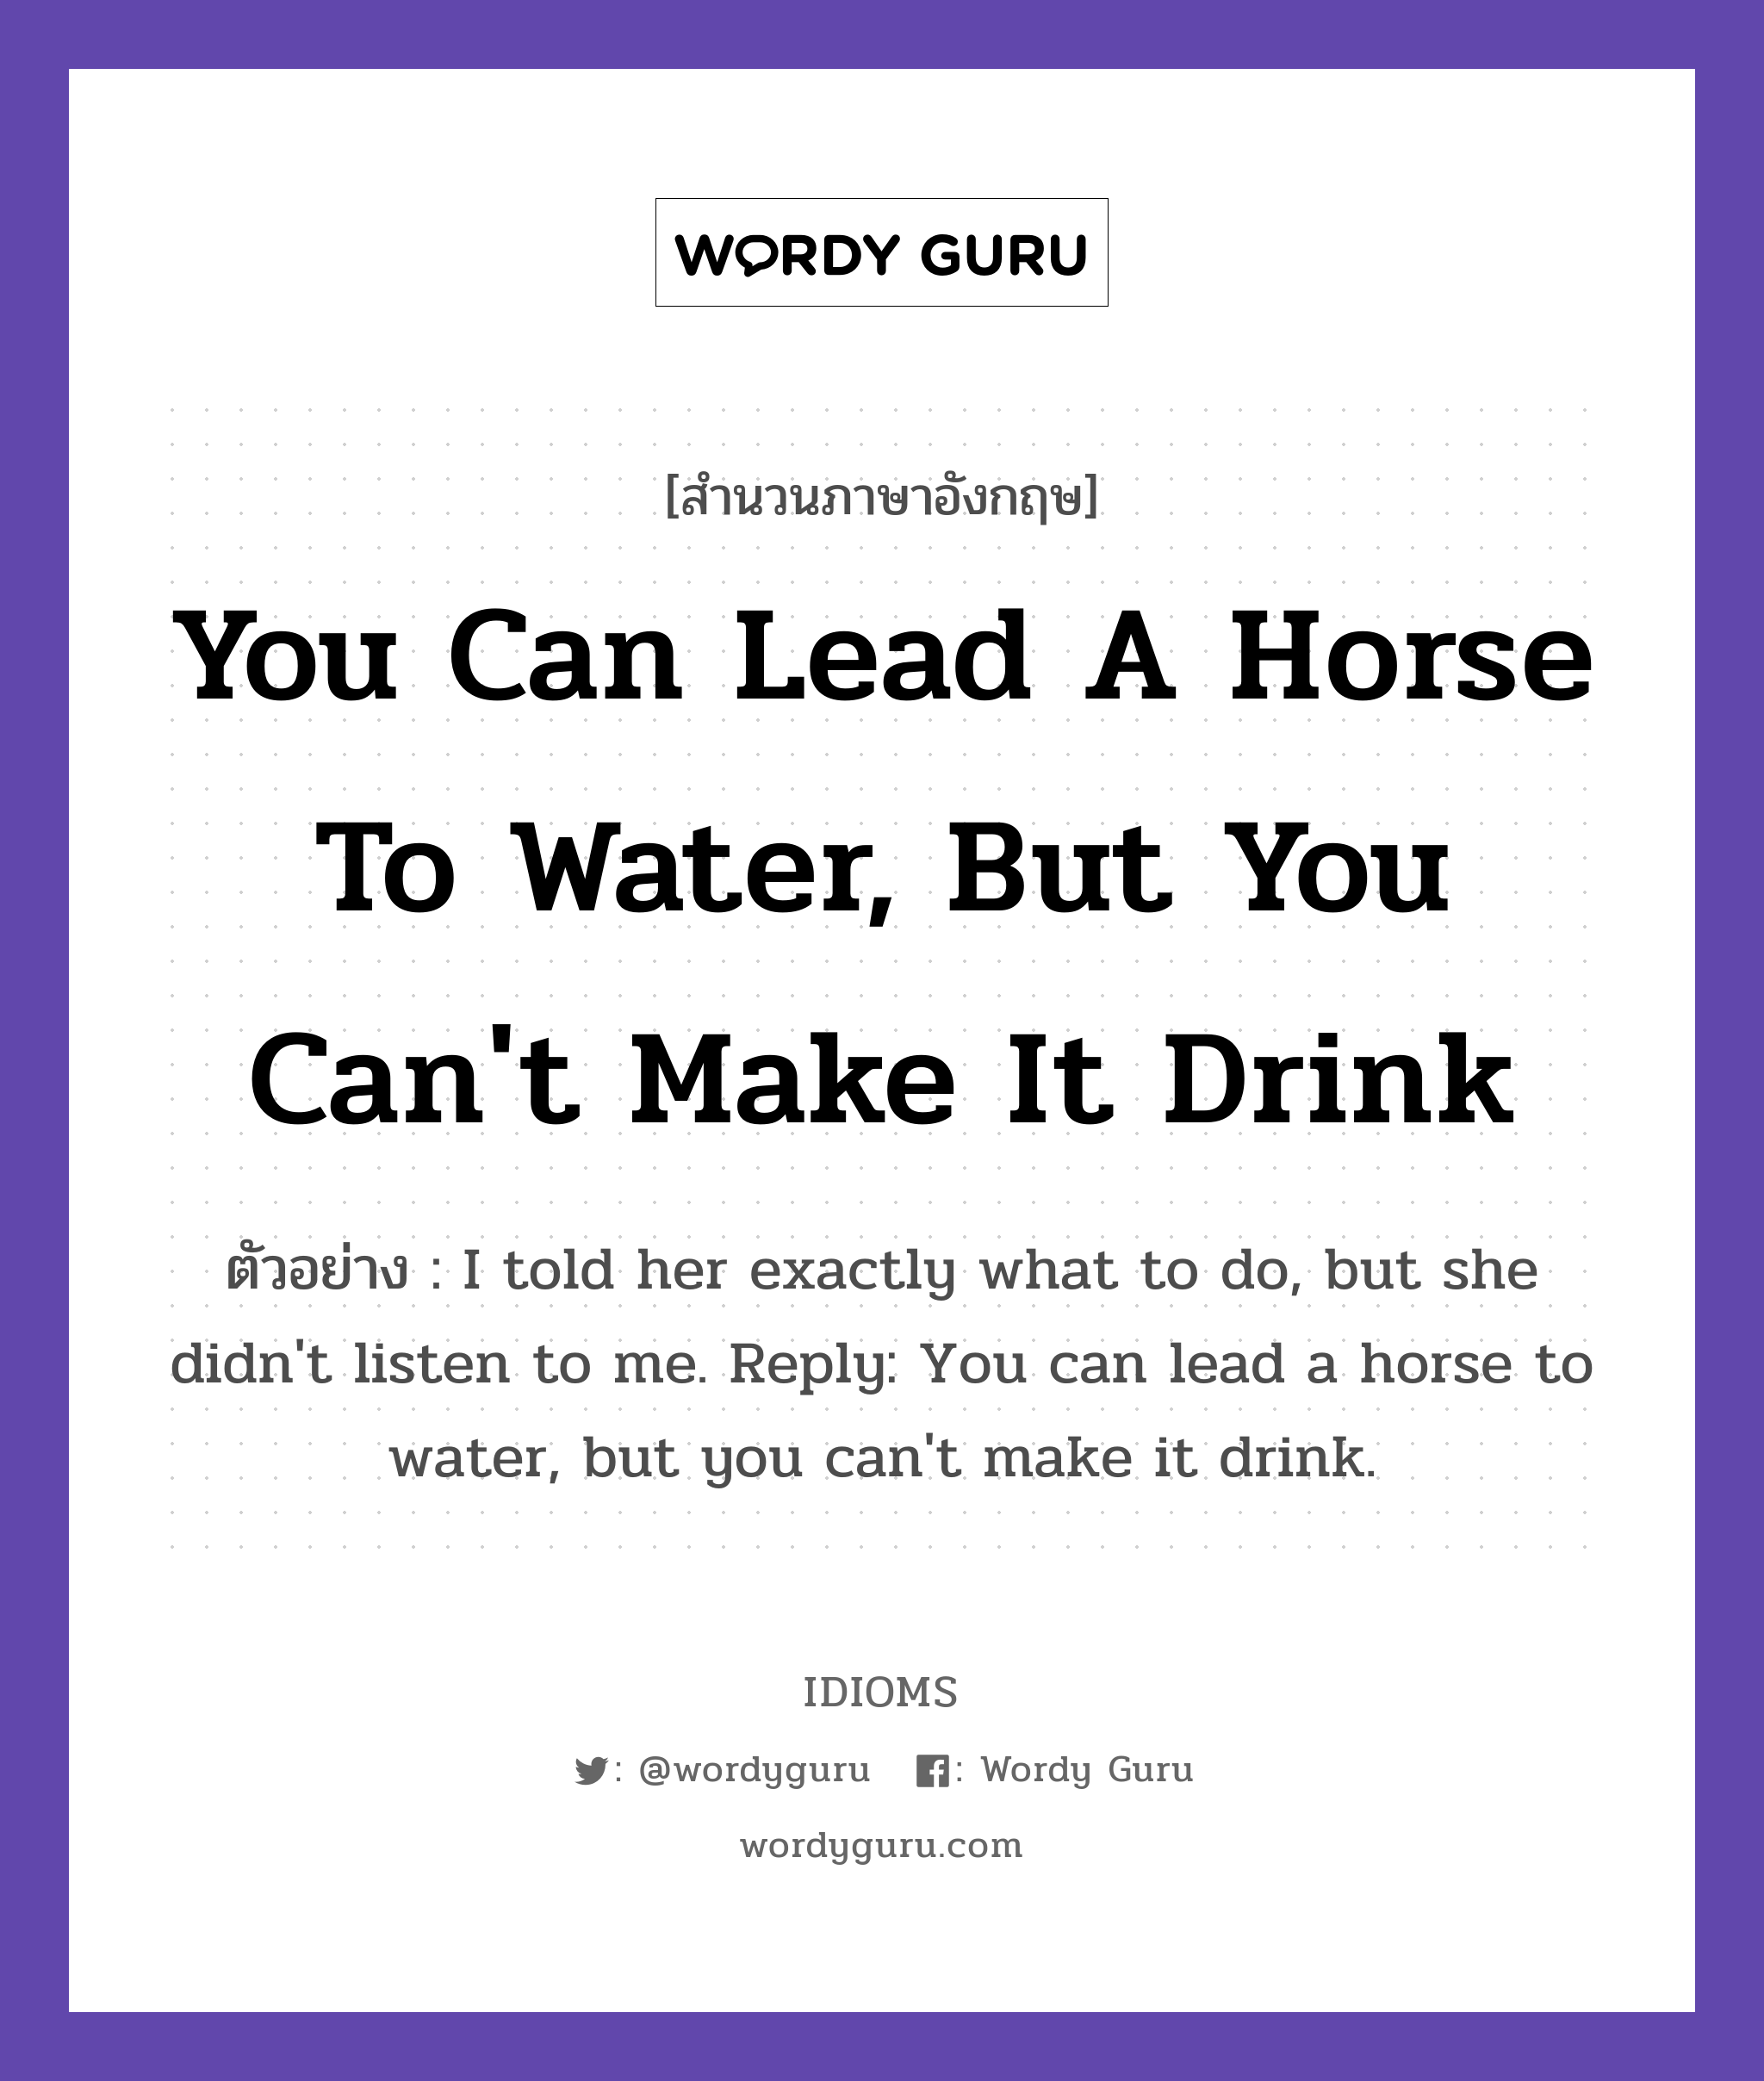 You Can Lead A Horse To Water, But You Can't Make It Drink แปลว่า?, สำนวนภาษาอังกฤษ You Can Lead A Horse To Water, But You Can't Make It Drink ตัวอย่าง I told her exactly what to do, but she didn't listen to me. Reply: You can lead a horse to water, but you can't make it drink.